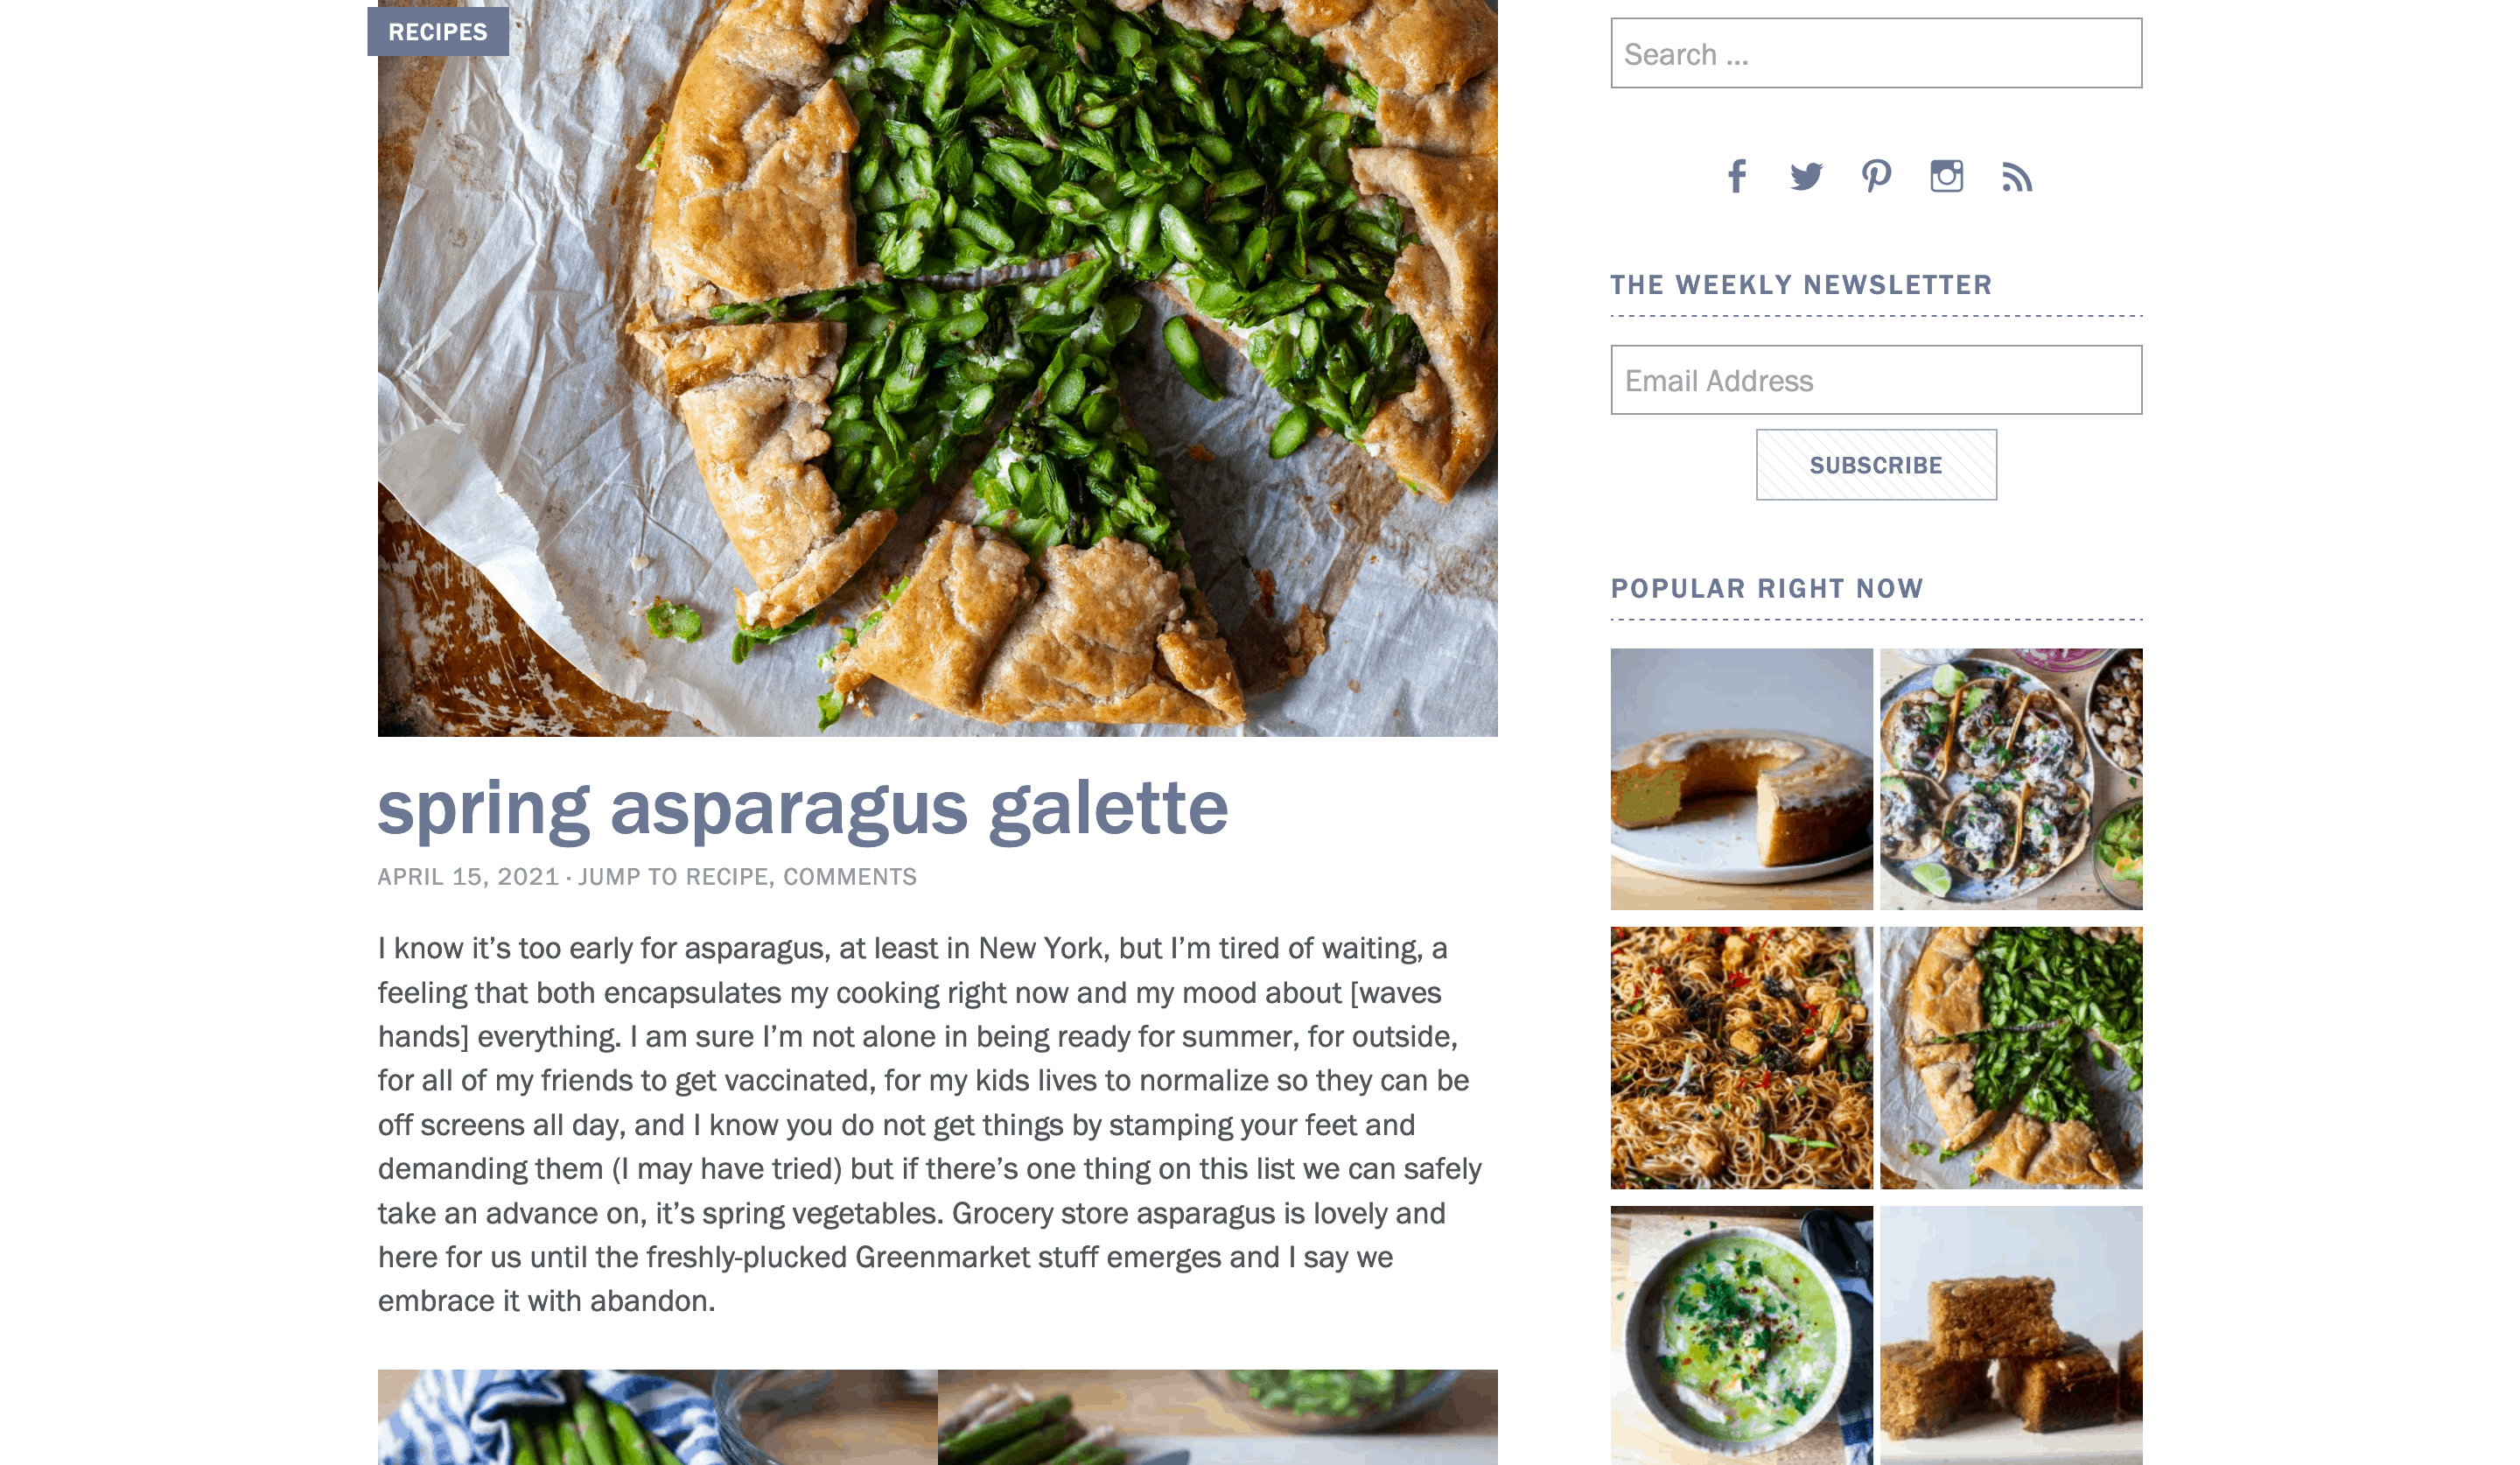 Additional functionality on a food blog.